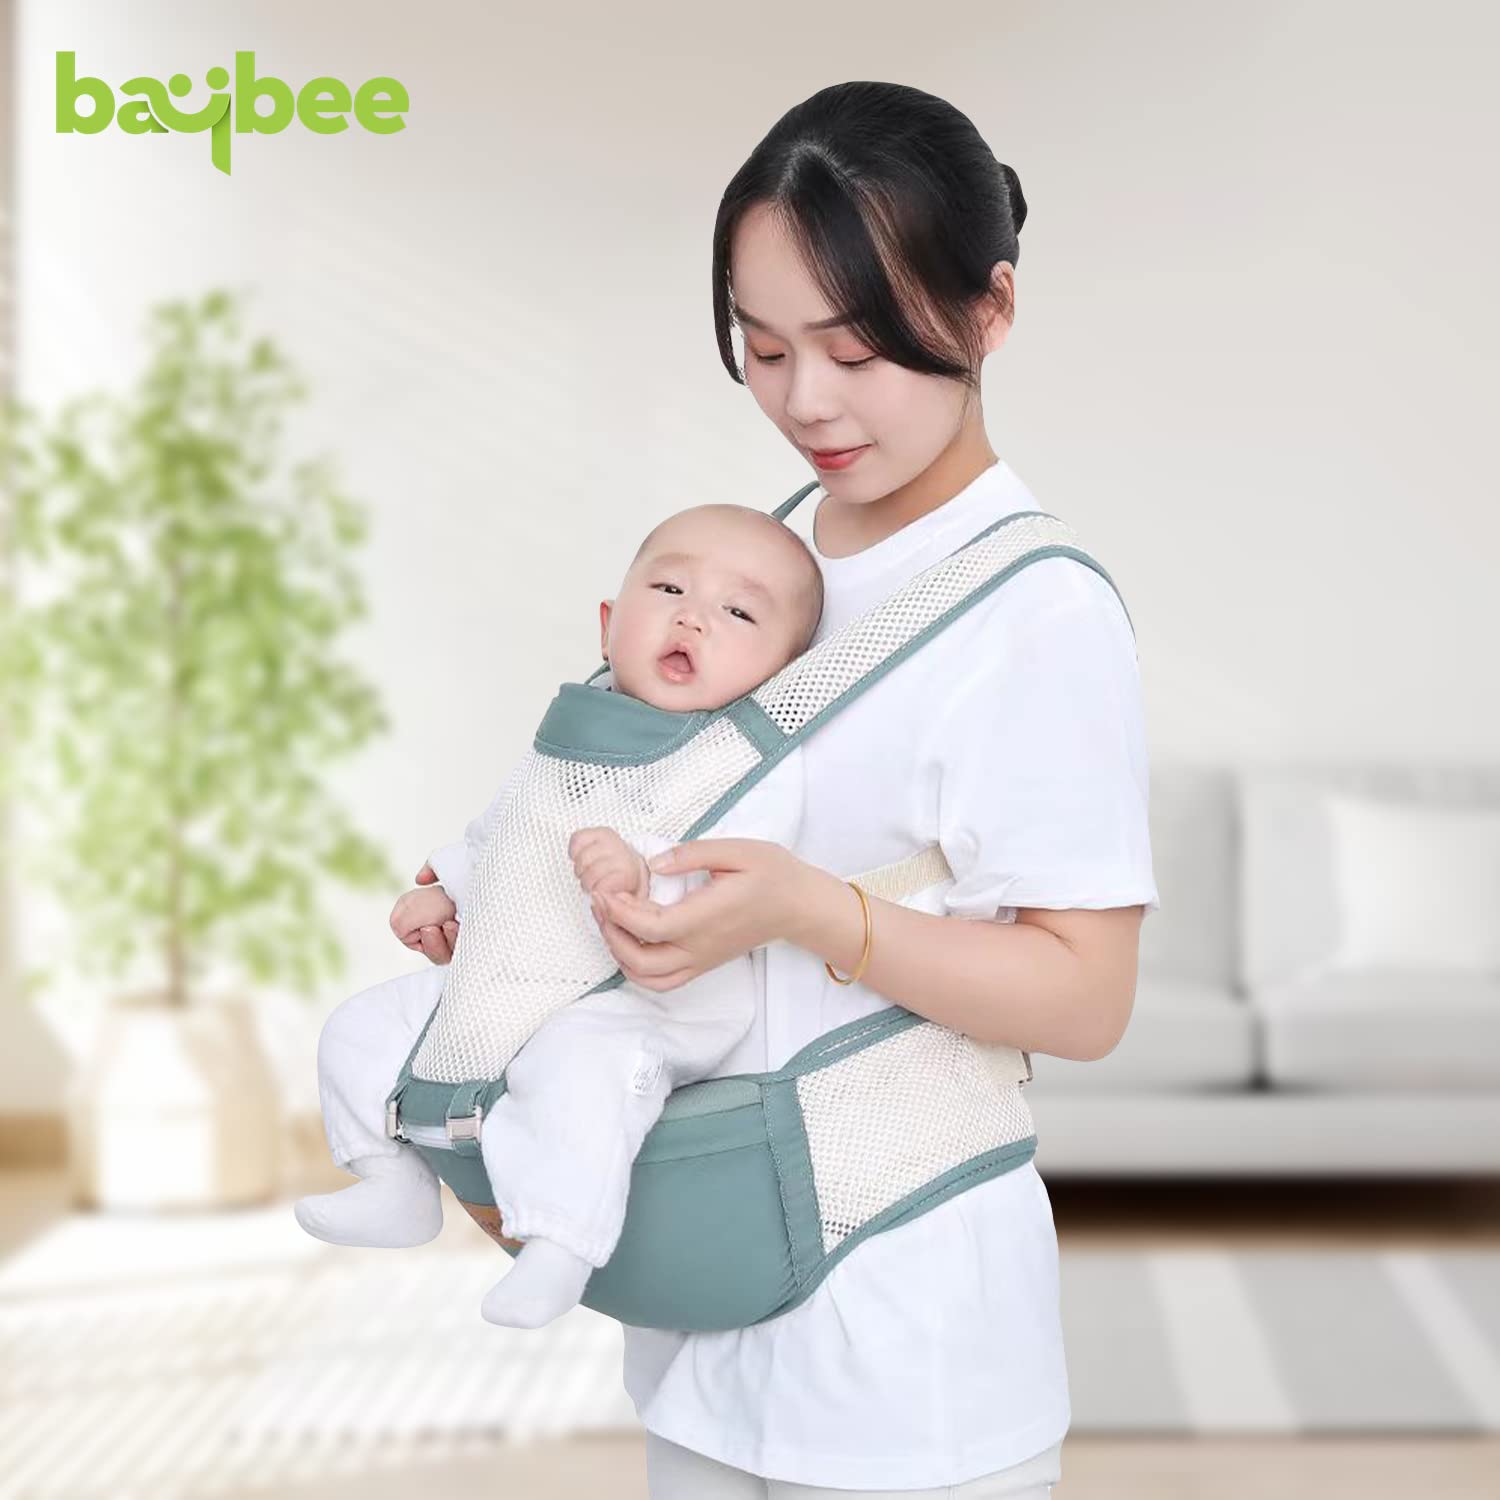 6 in 1 Ergo II Hip Seat Baby Carrier / Kangaroo Bag with 6 Carry Positions for 3 to 24 Months (Green)